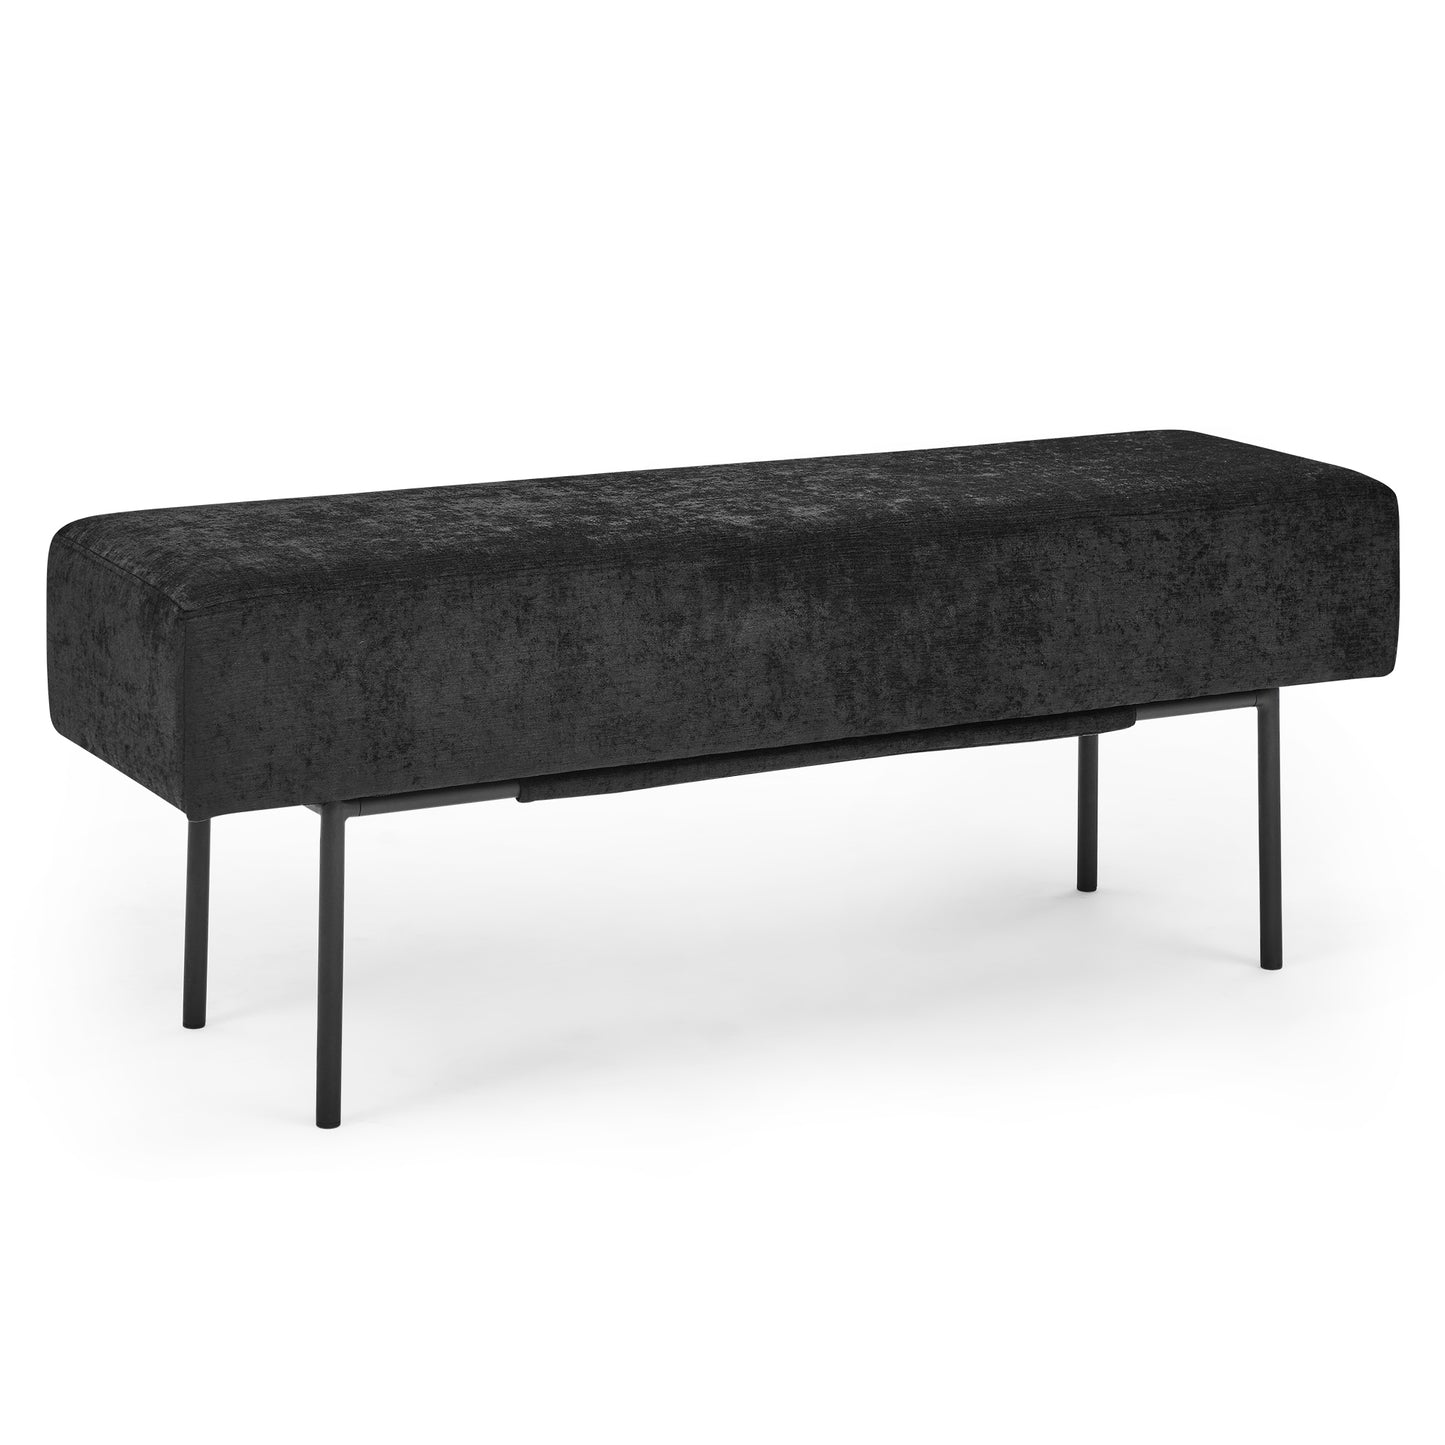 SYNGAR Entryway Bench, Fabric Upholstered Seat Footstool, Rectangular End of Bed Bench with Metal Legs, Ottoman Bench Seat for Bedroom Living Room Hallway, Modern Home Furniture Bed Bench, Black